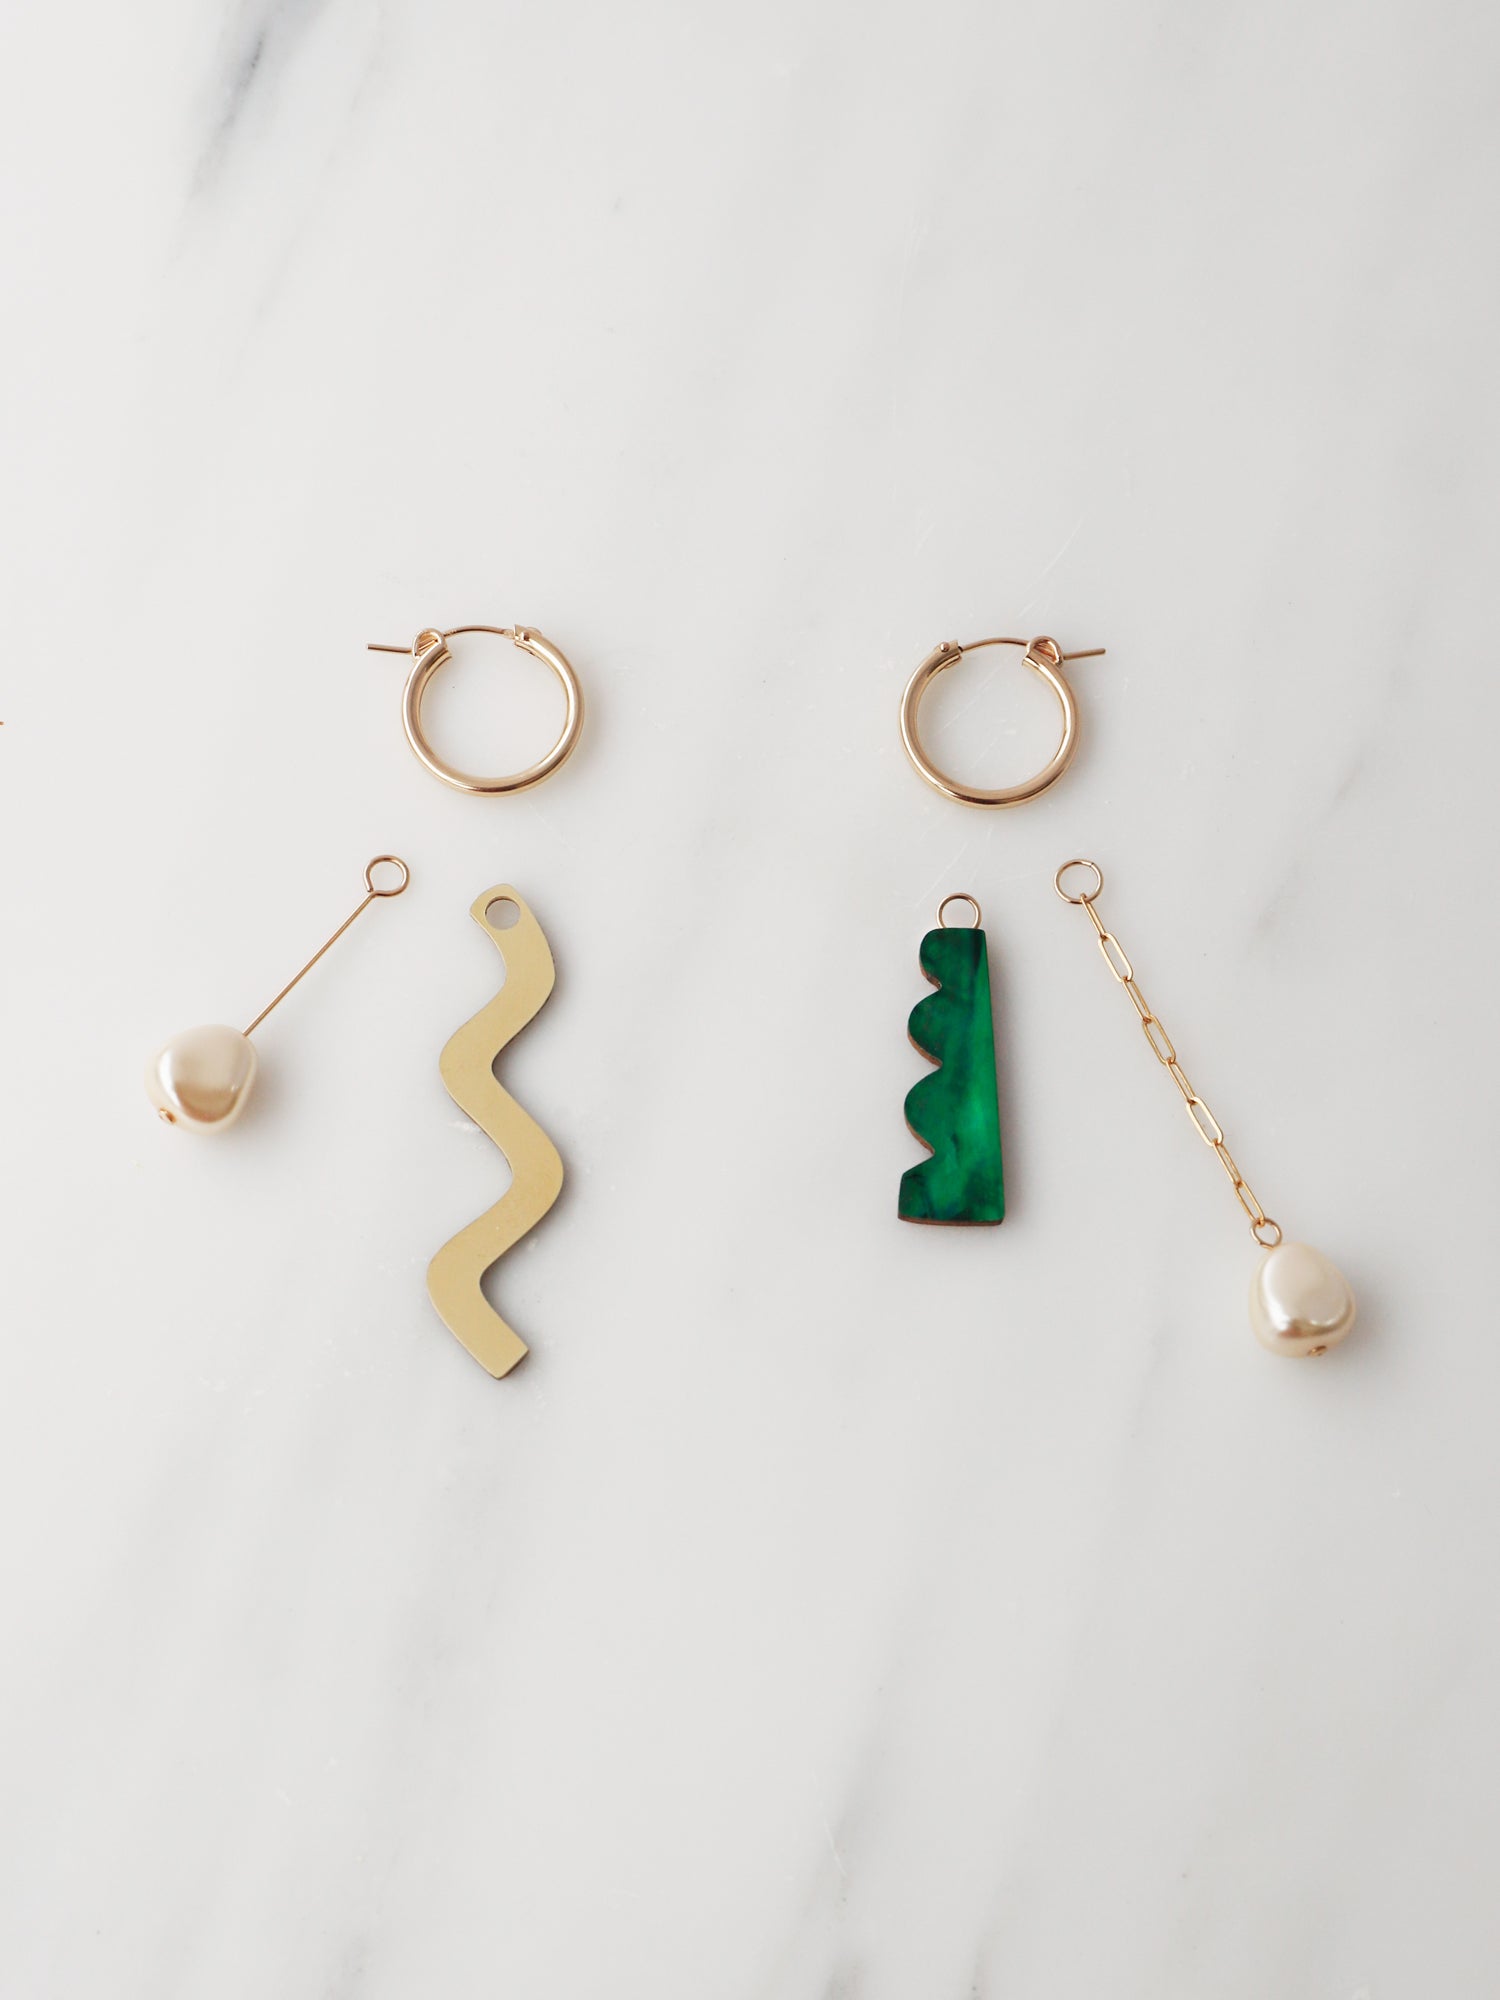 Martha Charm Hoops in Emerald. Playful hoop earrings with four interchangeable charms that can be worn individually or layered up in any combination. 14k gold-filled hoops. Handmade in the UK by Wolf & Moon.